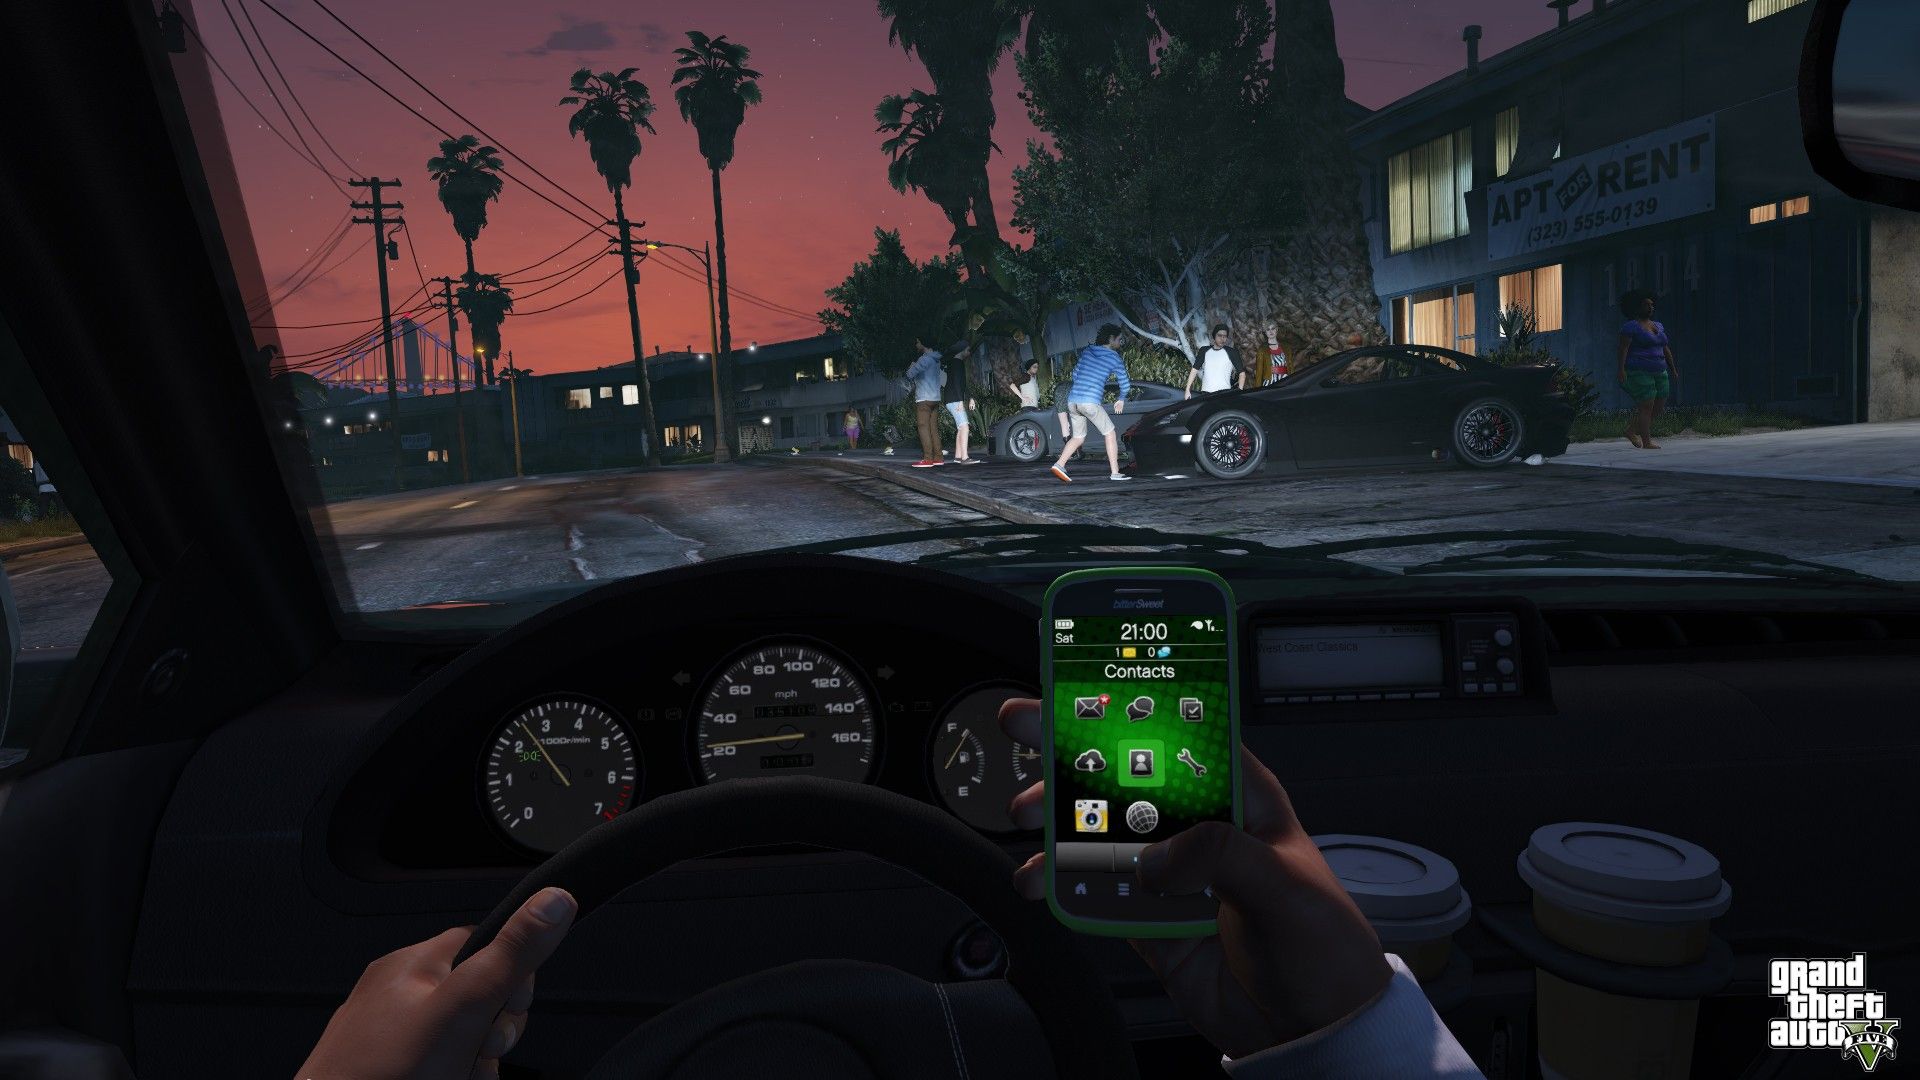 Gta 5 with first person фото 79